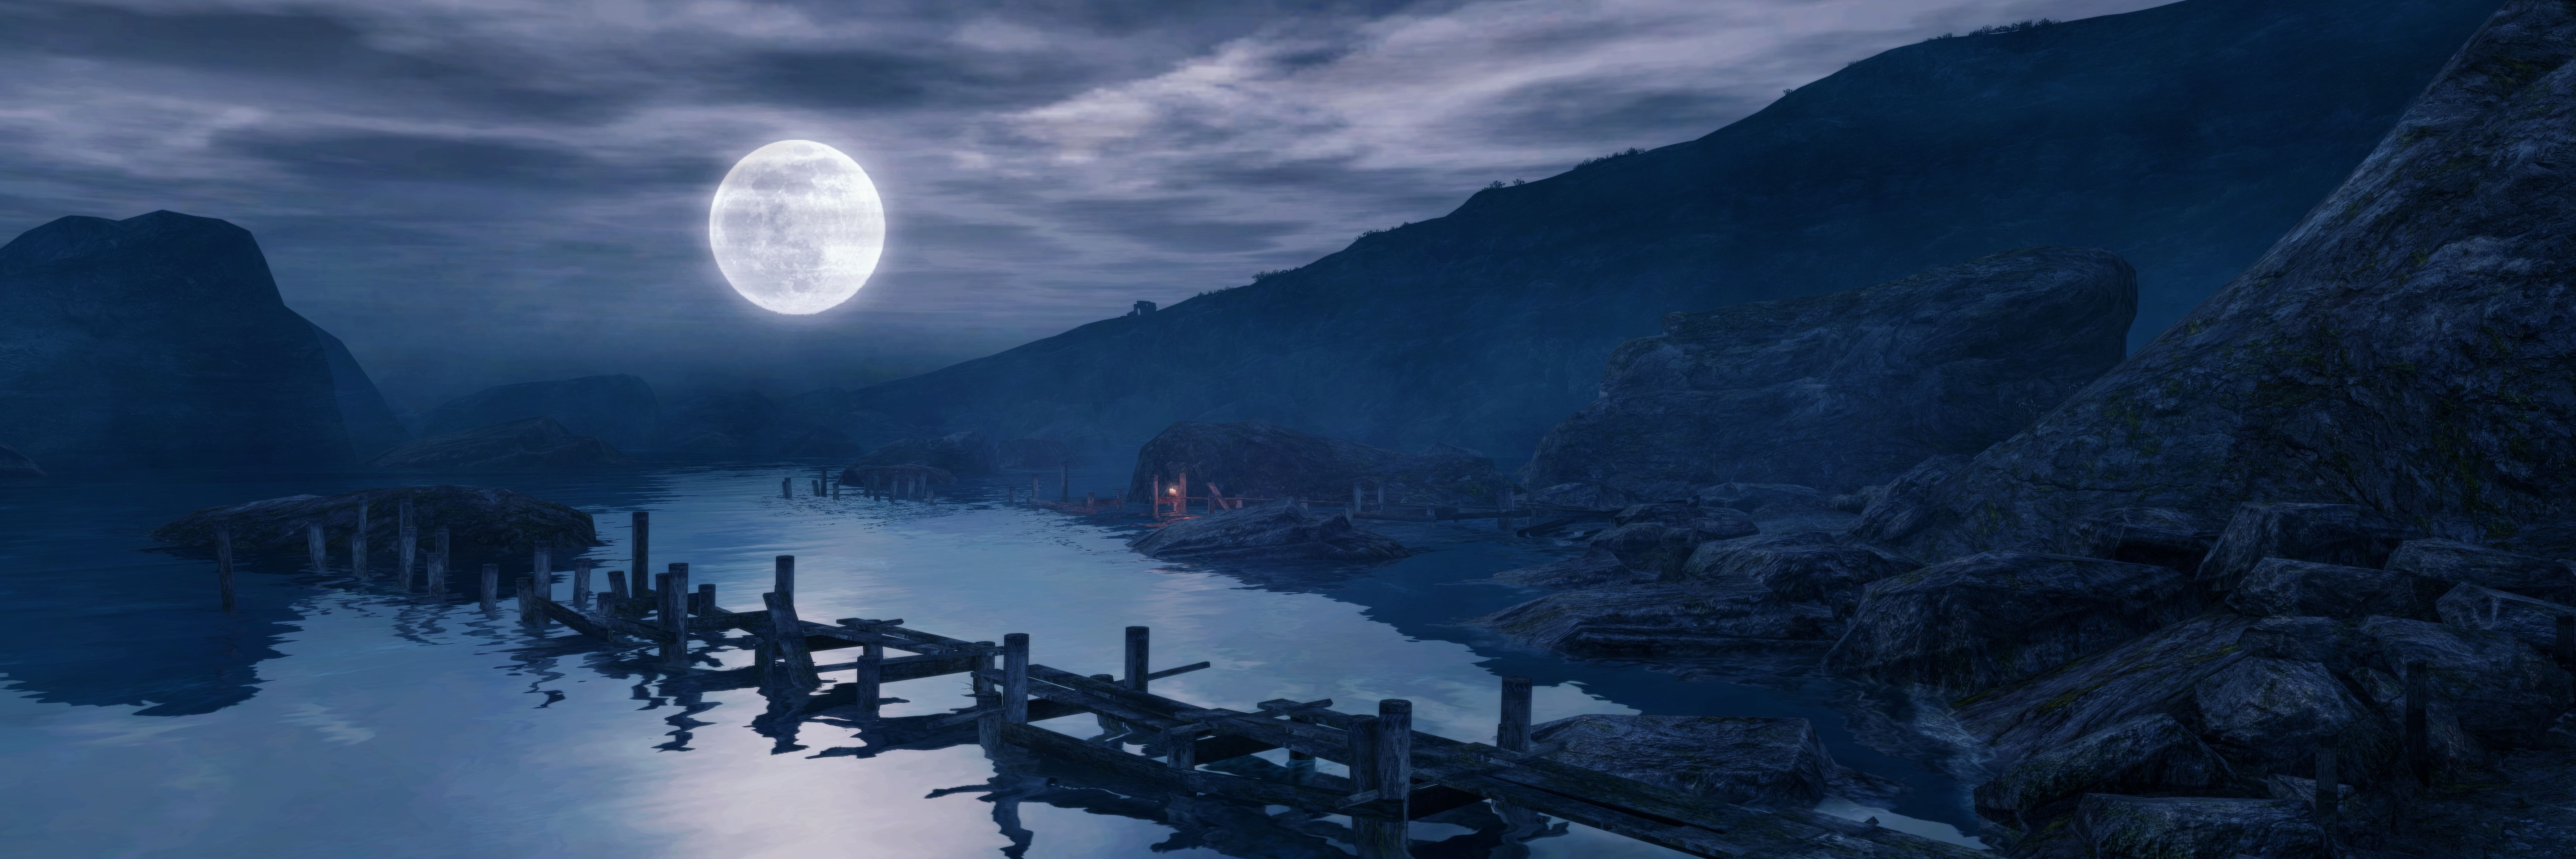 A wide shot of a night time landscape from Dear Esther, a huge moon lighting a small rocky beach, with the bones of a wooden jetty sticking out of the water in the foreground